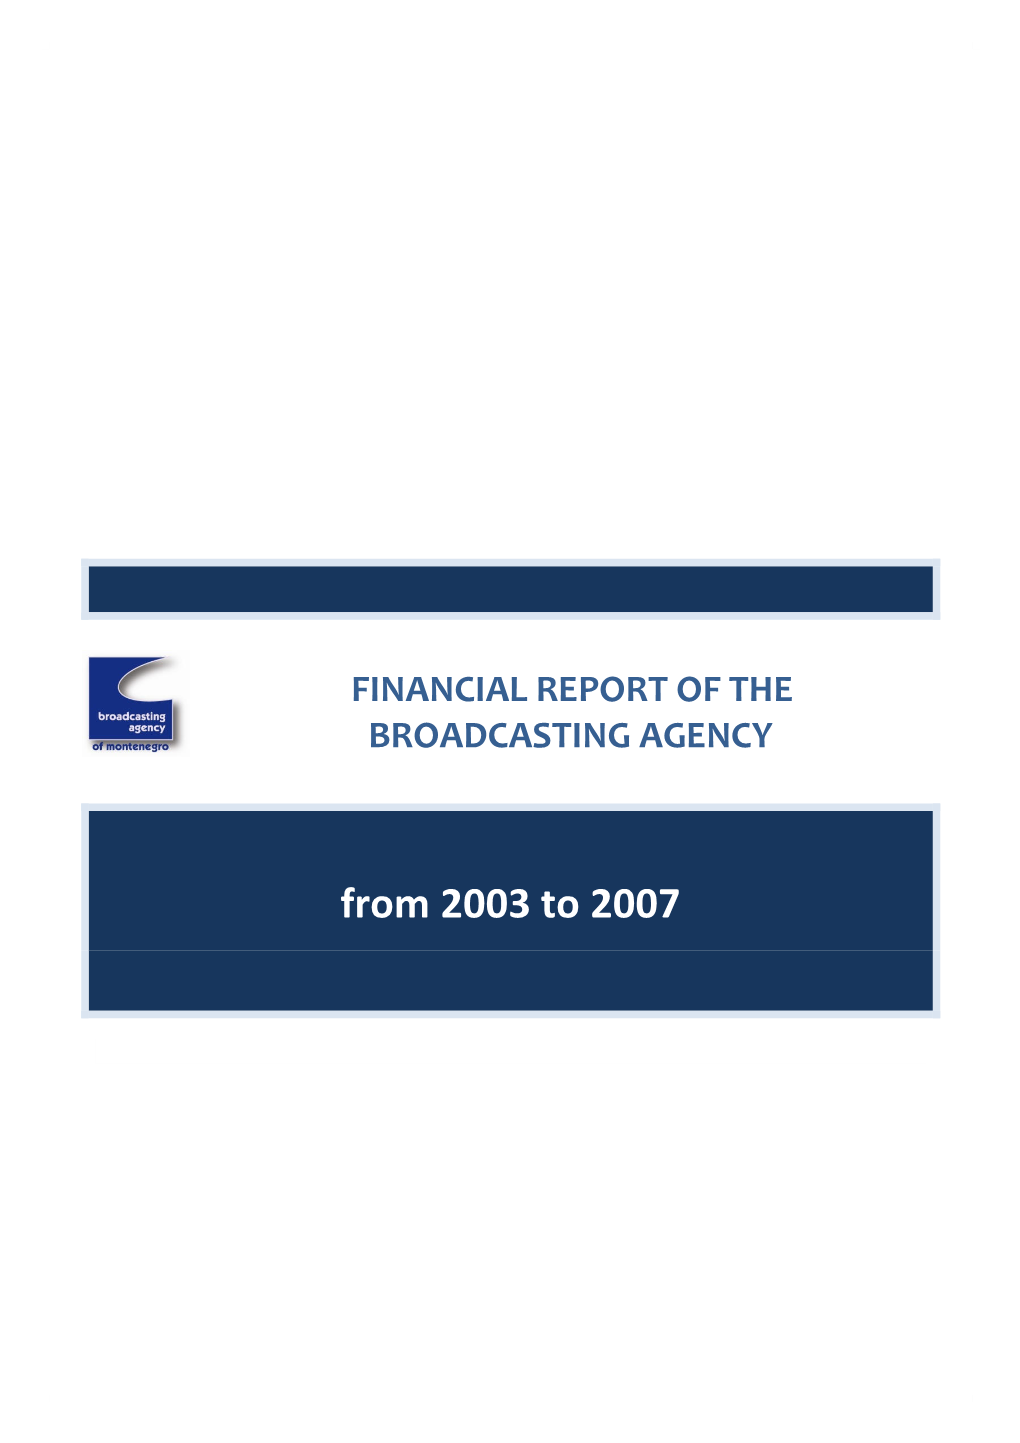 Broadcasting Agency 5-Yr Financial Report (2003-2007)